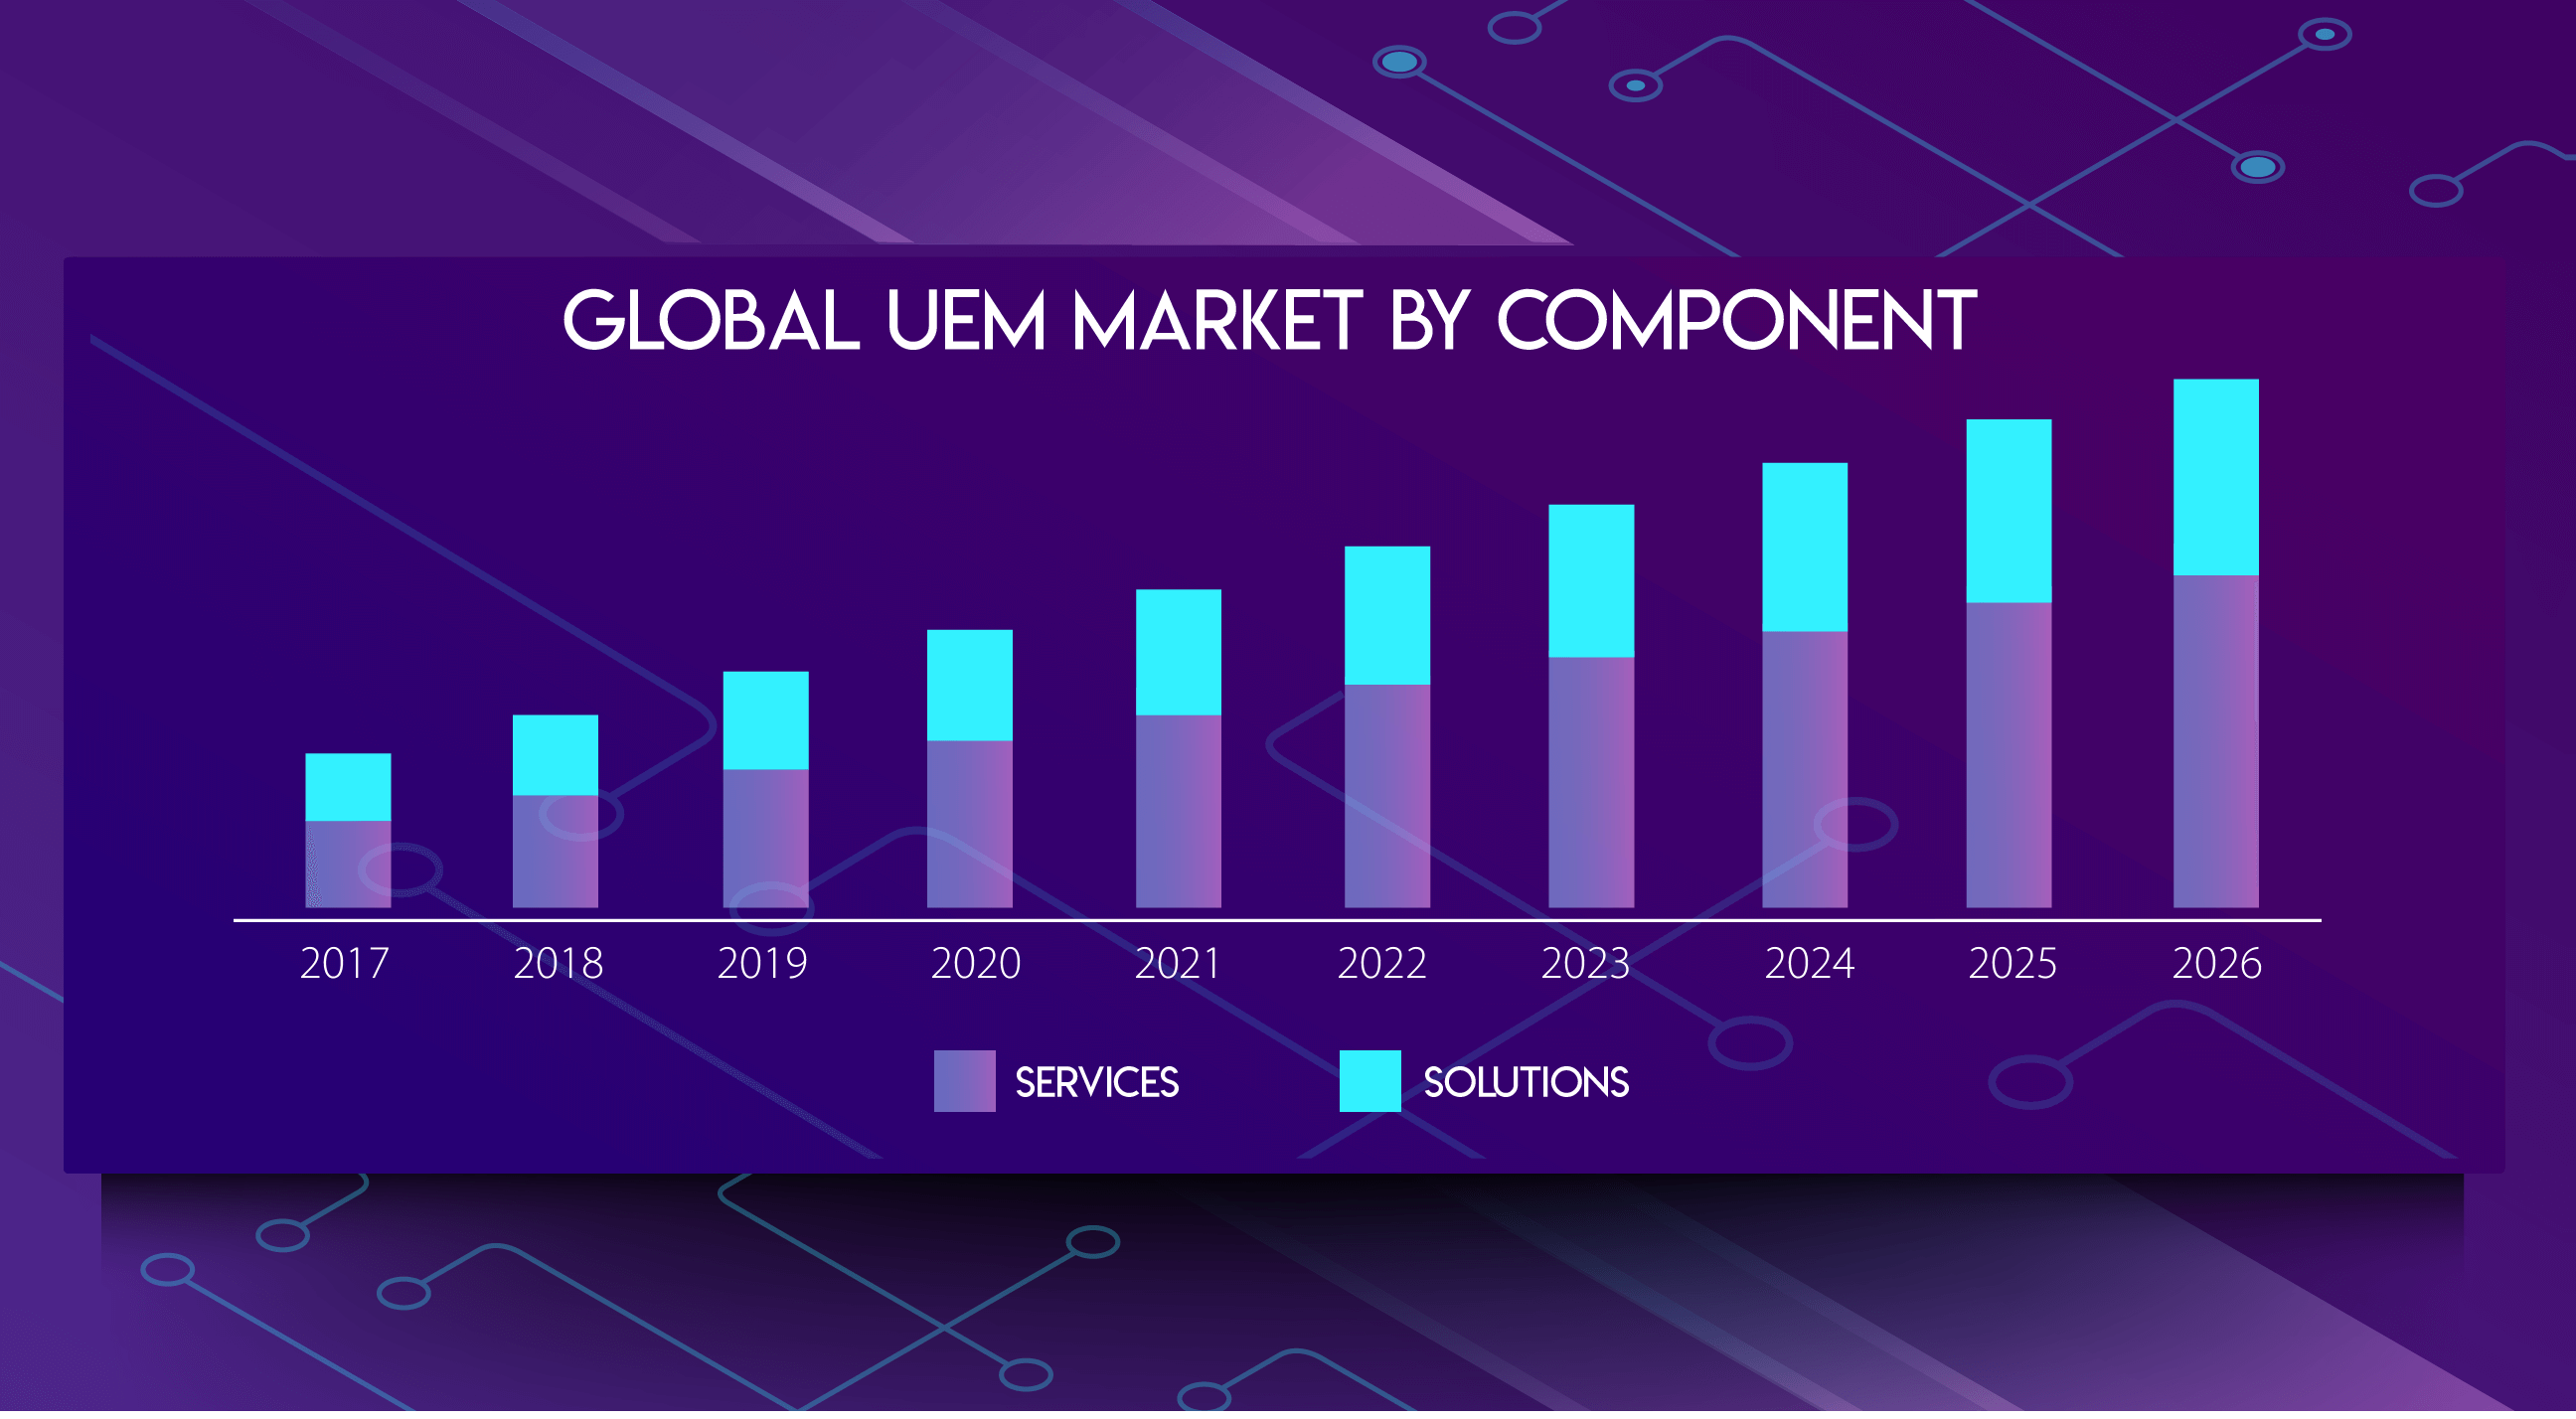 UEM Market Opportunities and UEM Forecast 2020 Components